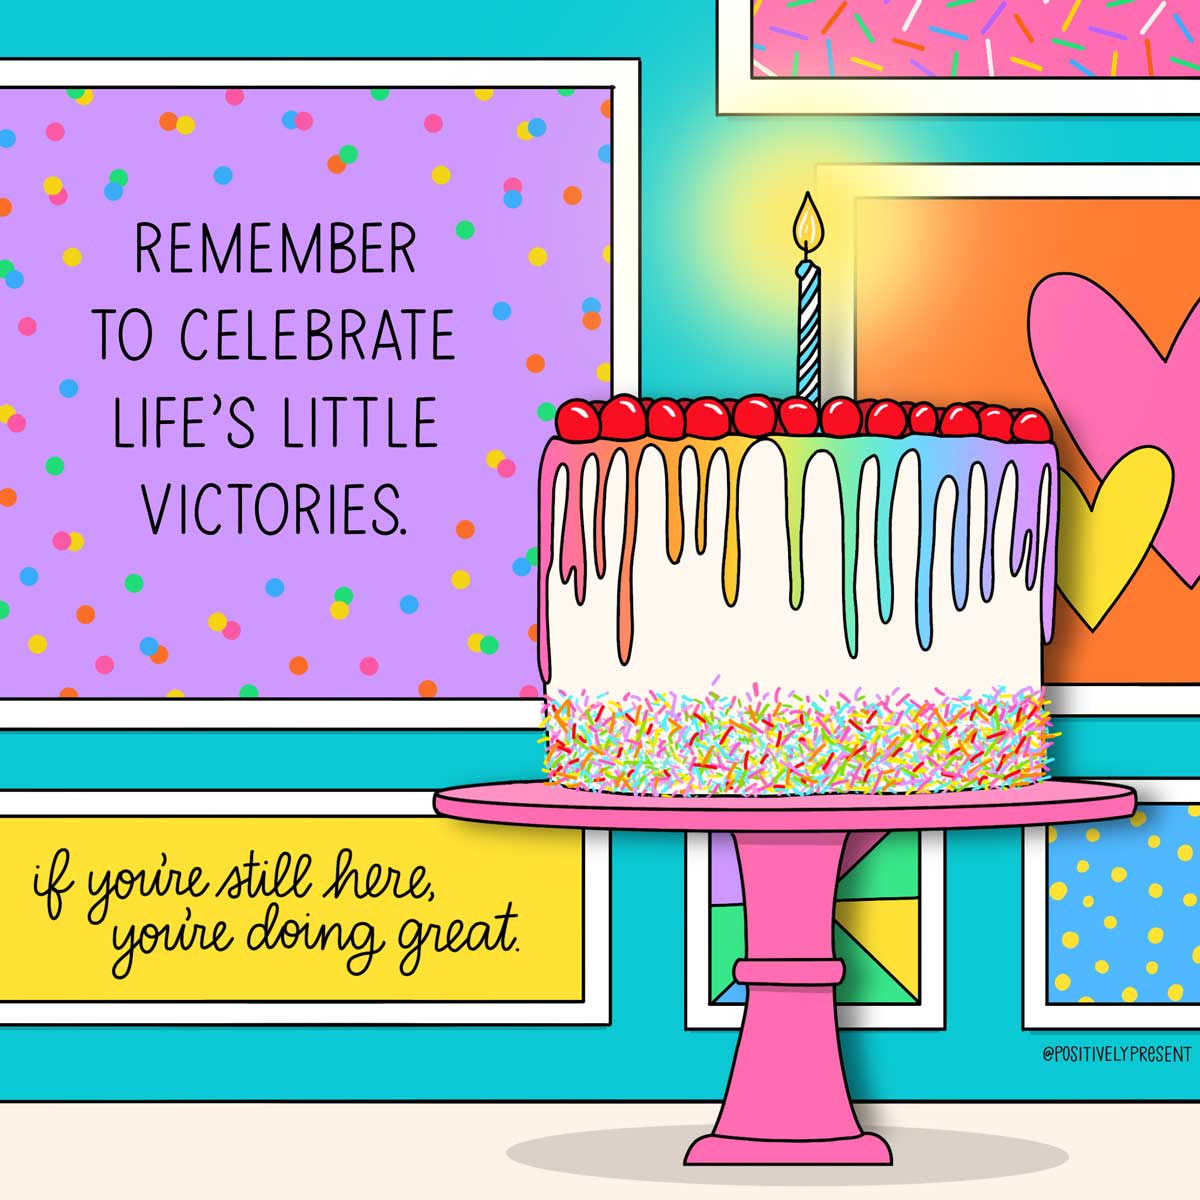 colorful room with birthday cake on stand says remember to celebrate life's little victories.